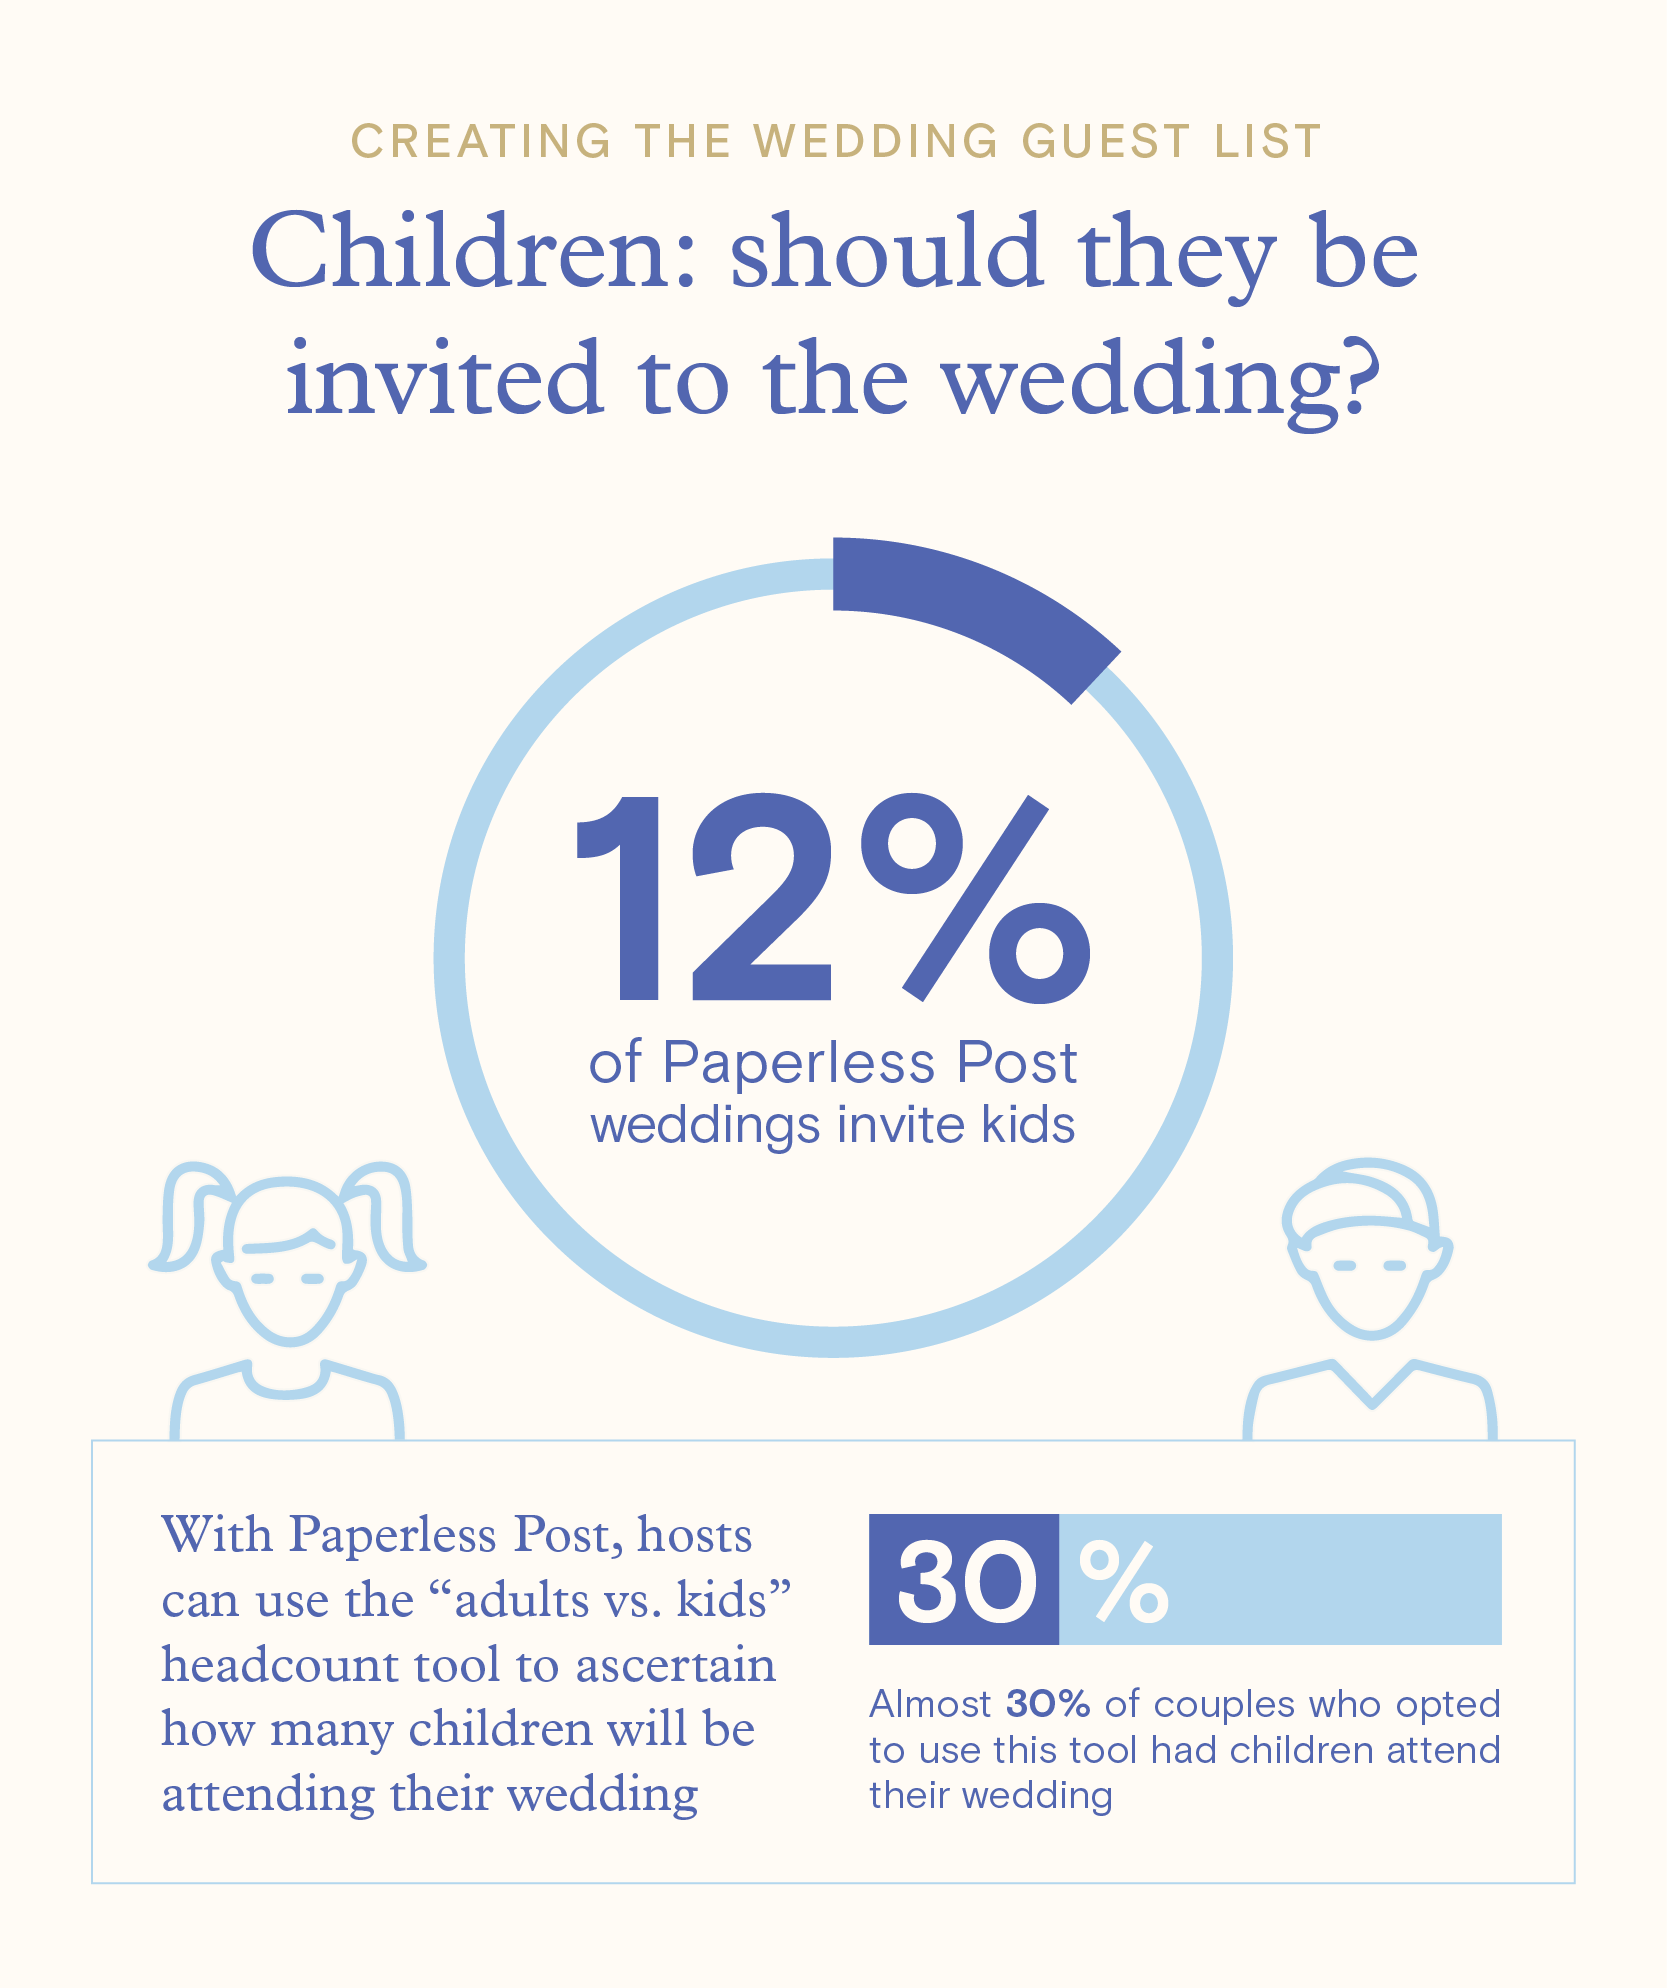 An infographic explaining how many weddings invite kids and how to use Paperless Post’s “adults vs. kids” headcount tool to ascertain how many children will be at the wedding.